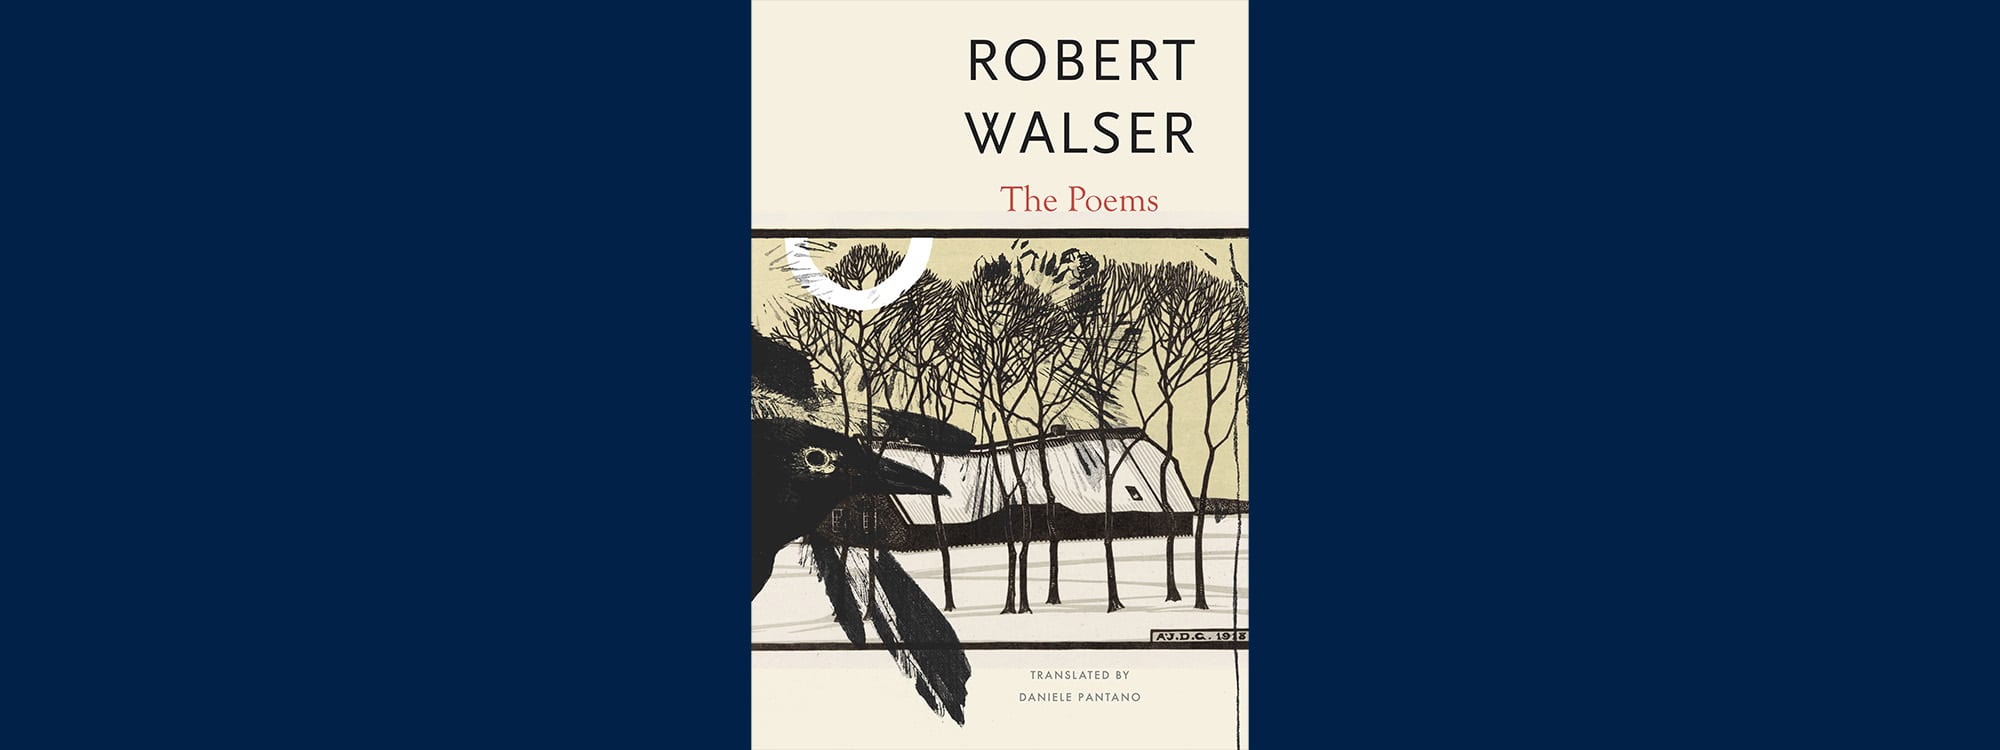 A book cover for Robert Walser: The Poems